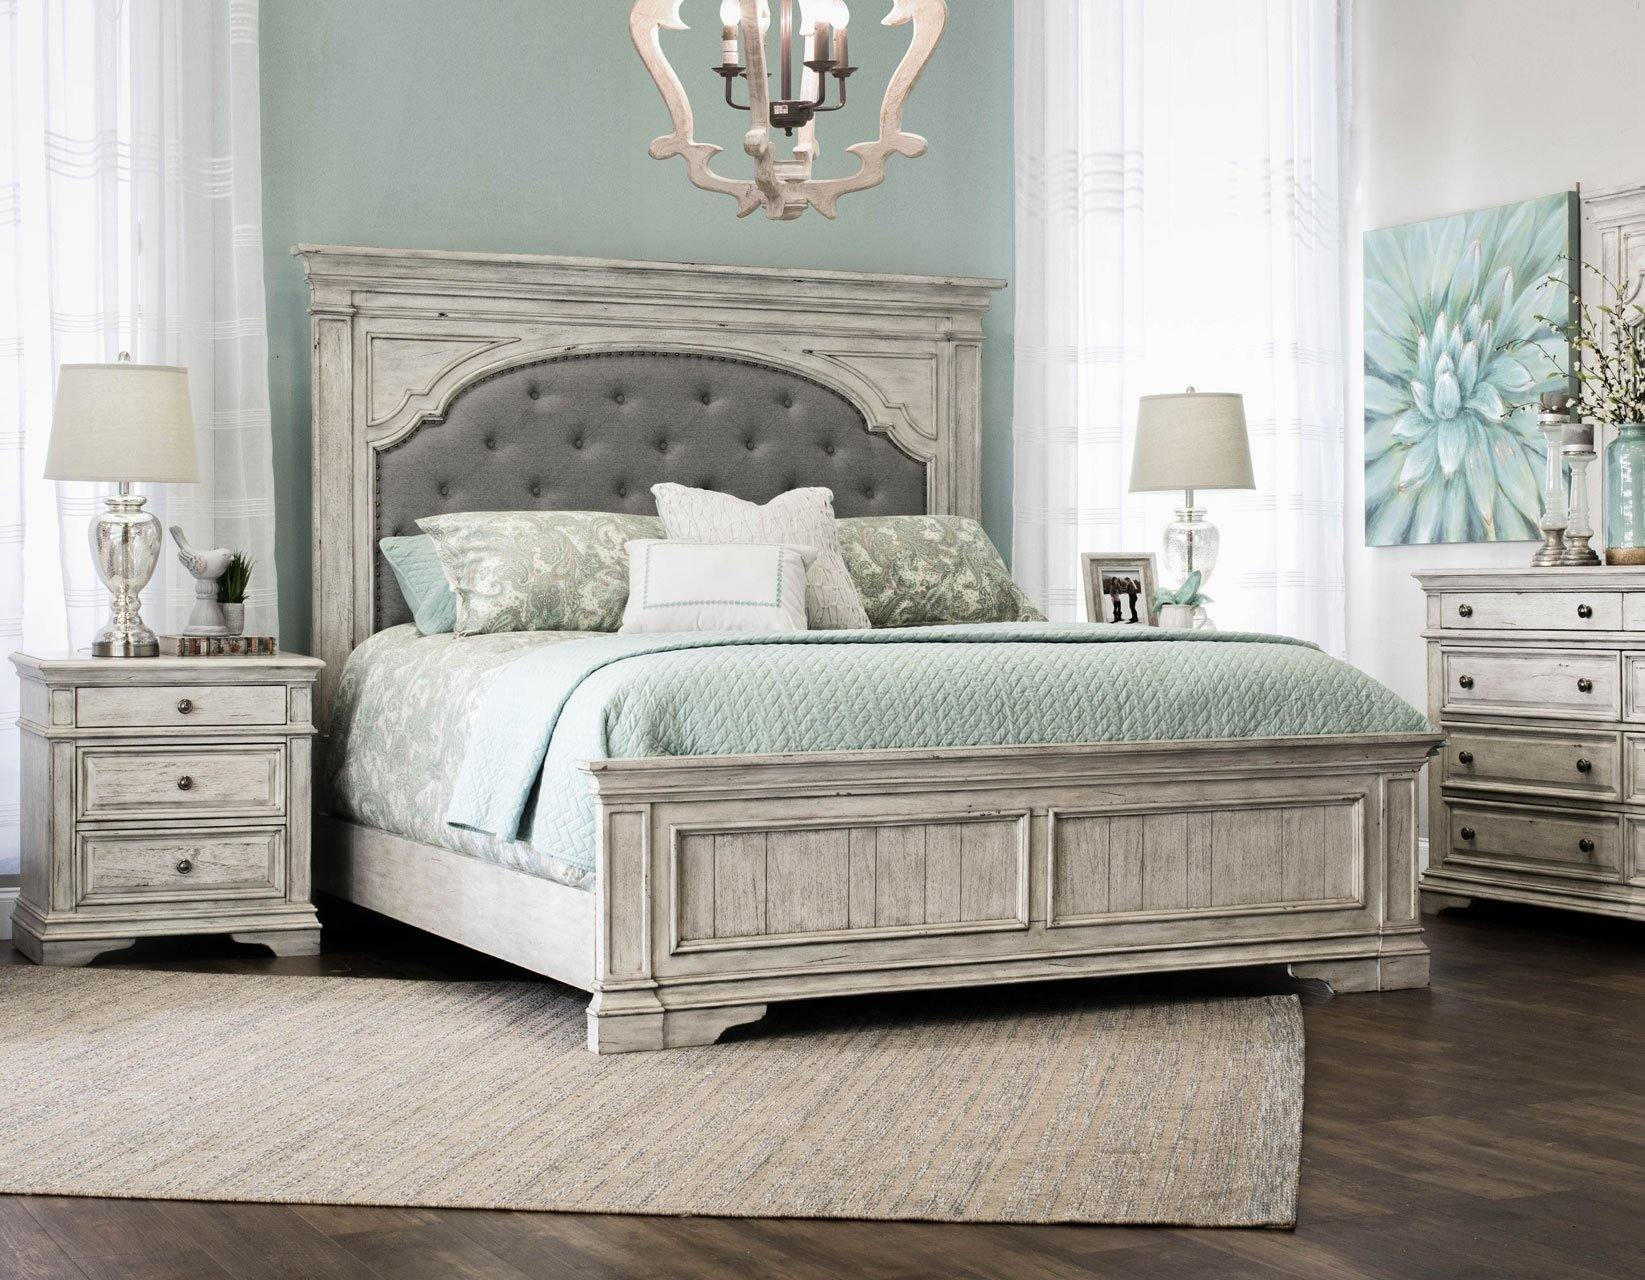 Highland Park HP900 Distressed Cathedral White Bedroom Set by Steve Silver - Crazy Mattress Man